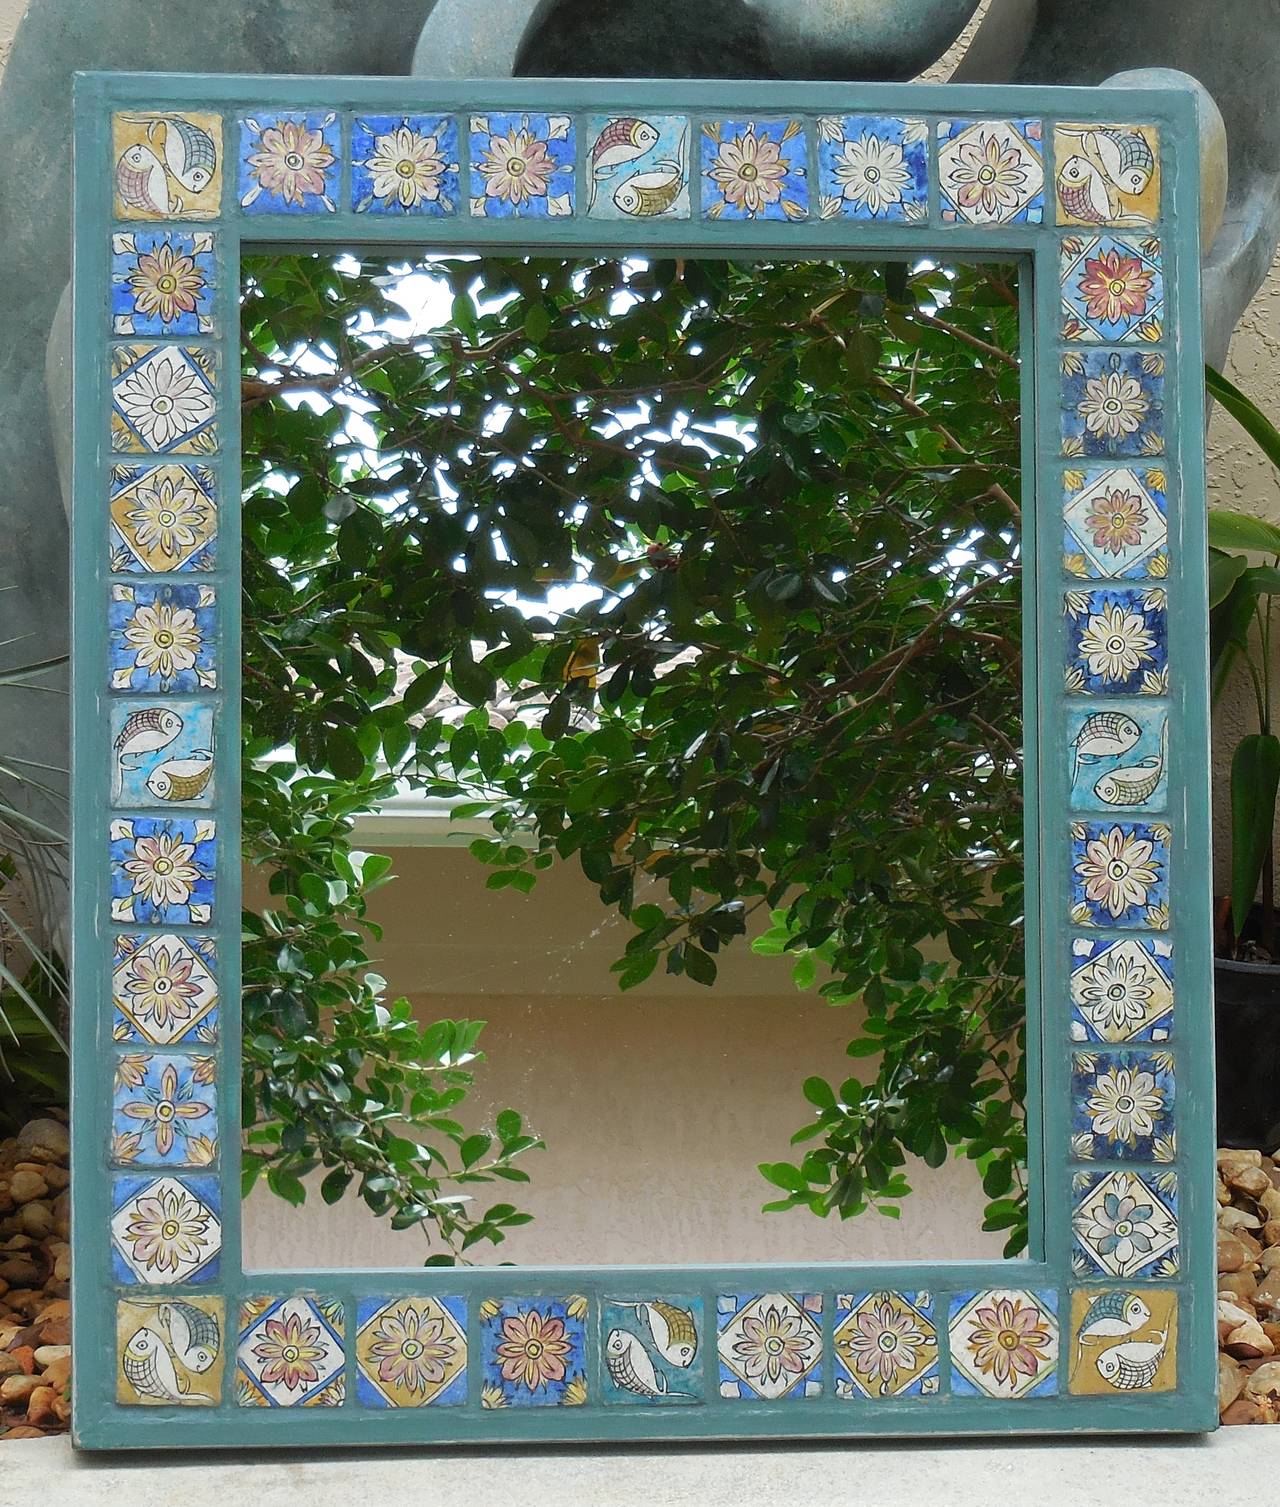 Beautiful mirror made of hand-painted and glass Persian ceramic tiles laid on wood frame, treated with water repellent all around and could stay the elements.
Floral and fish motif tiles.
Could hang horizontal or vertical.
Actual mirror side: